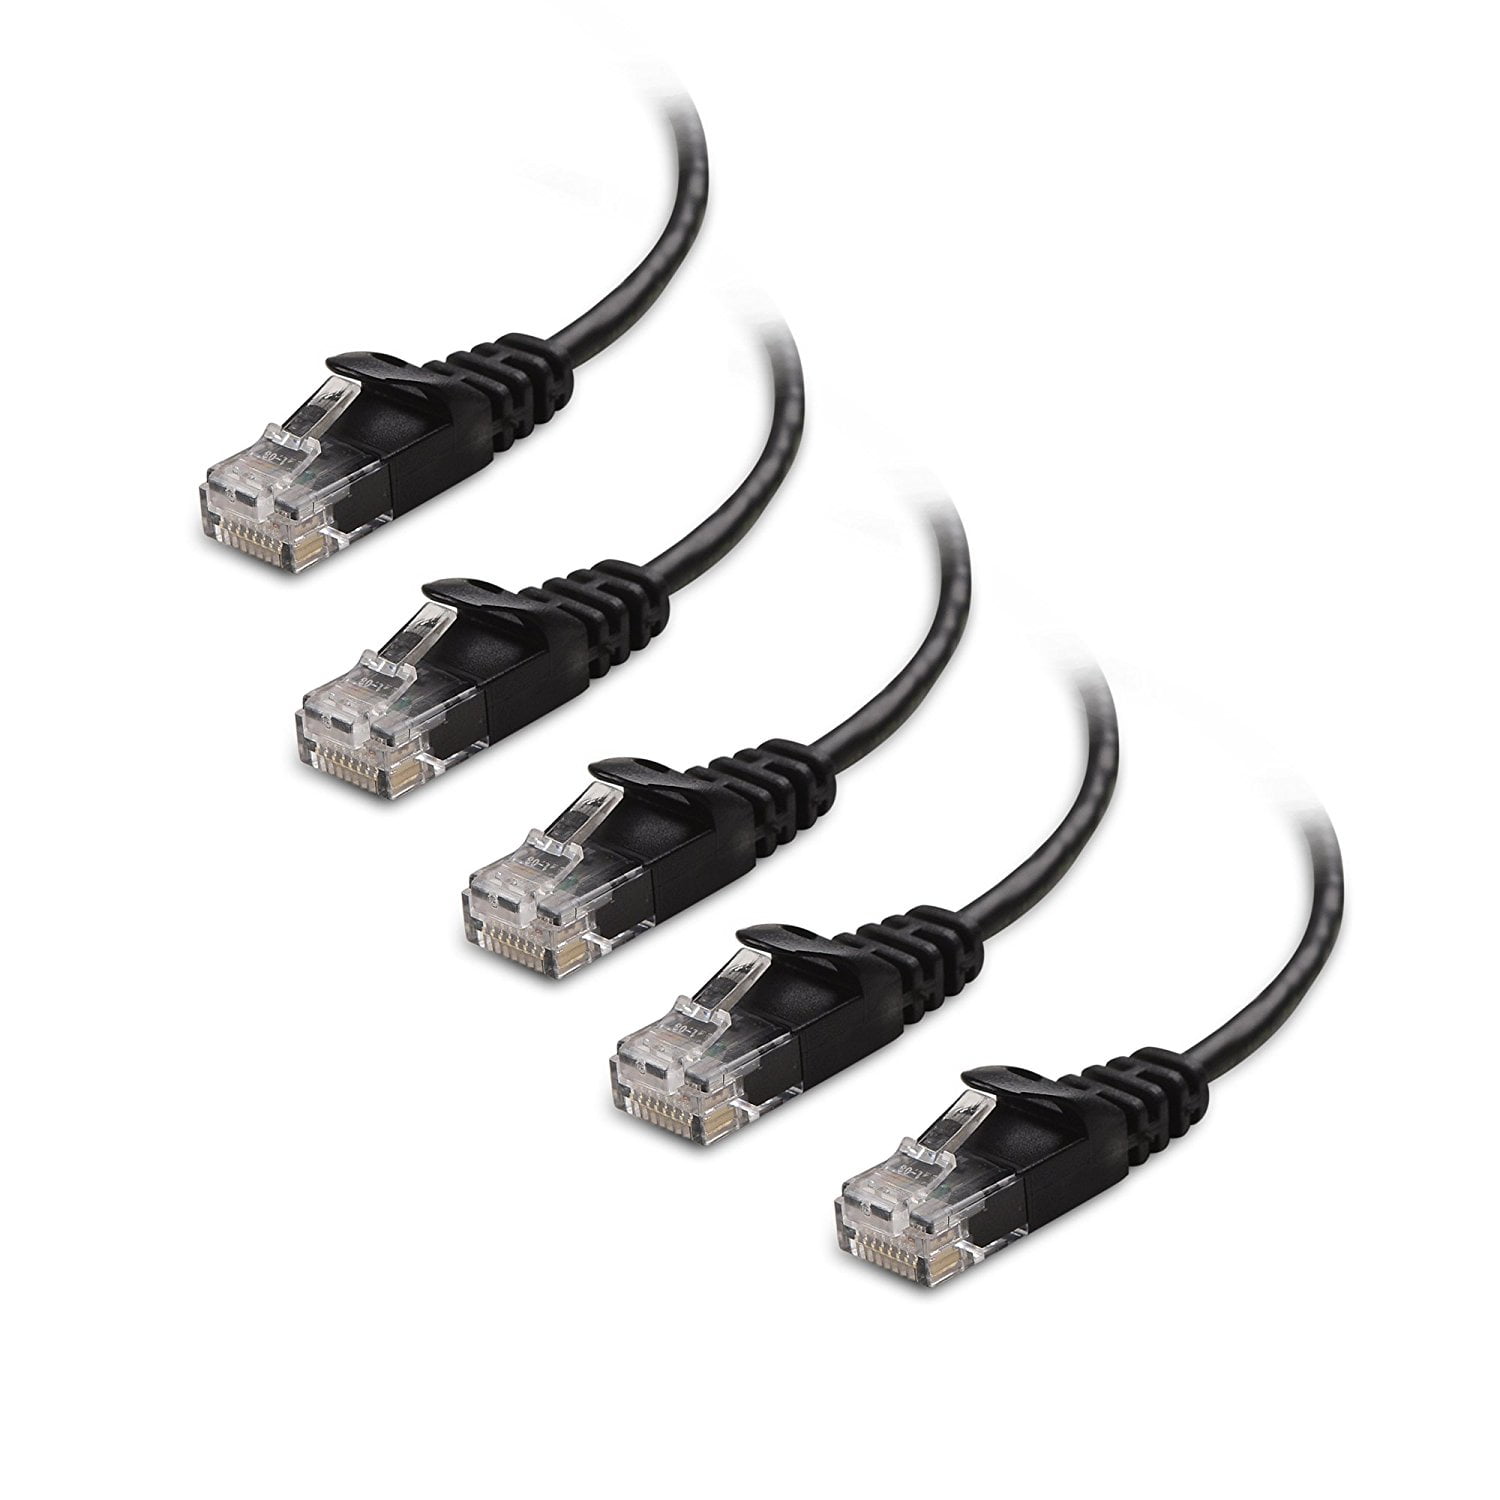 Pack of 5-5-Foot Blue Basics Snagless RJ45 Cat-6 Ethernet Patch Internet Cable